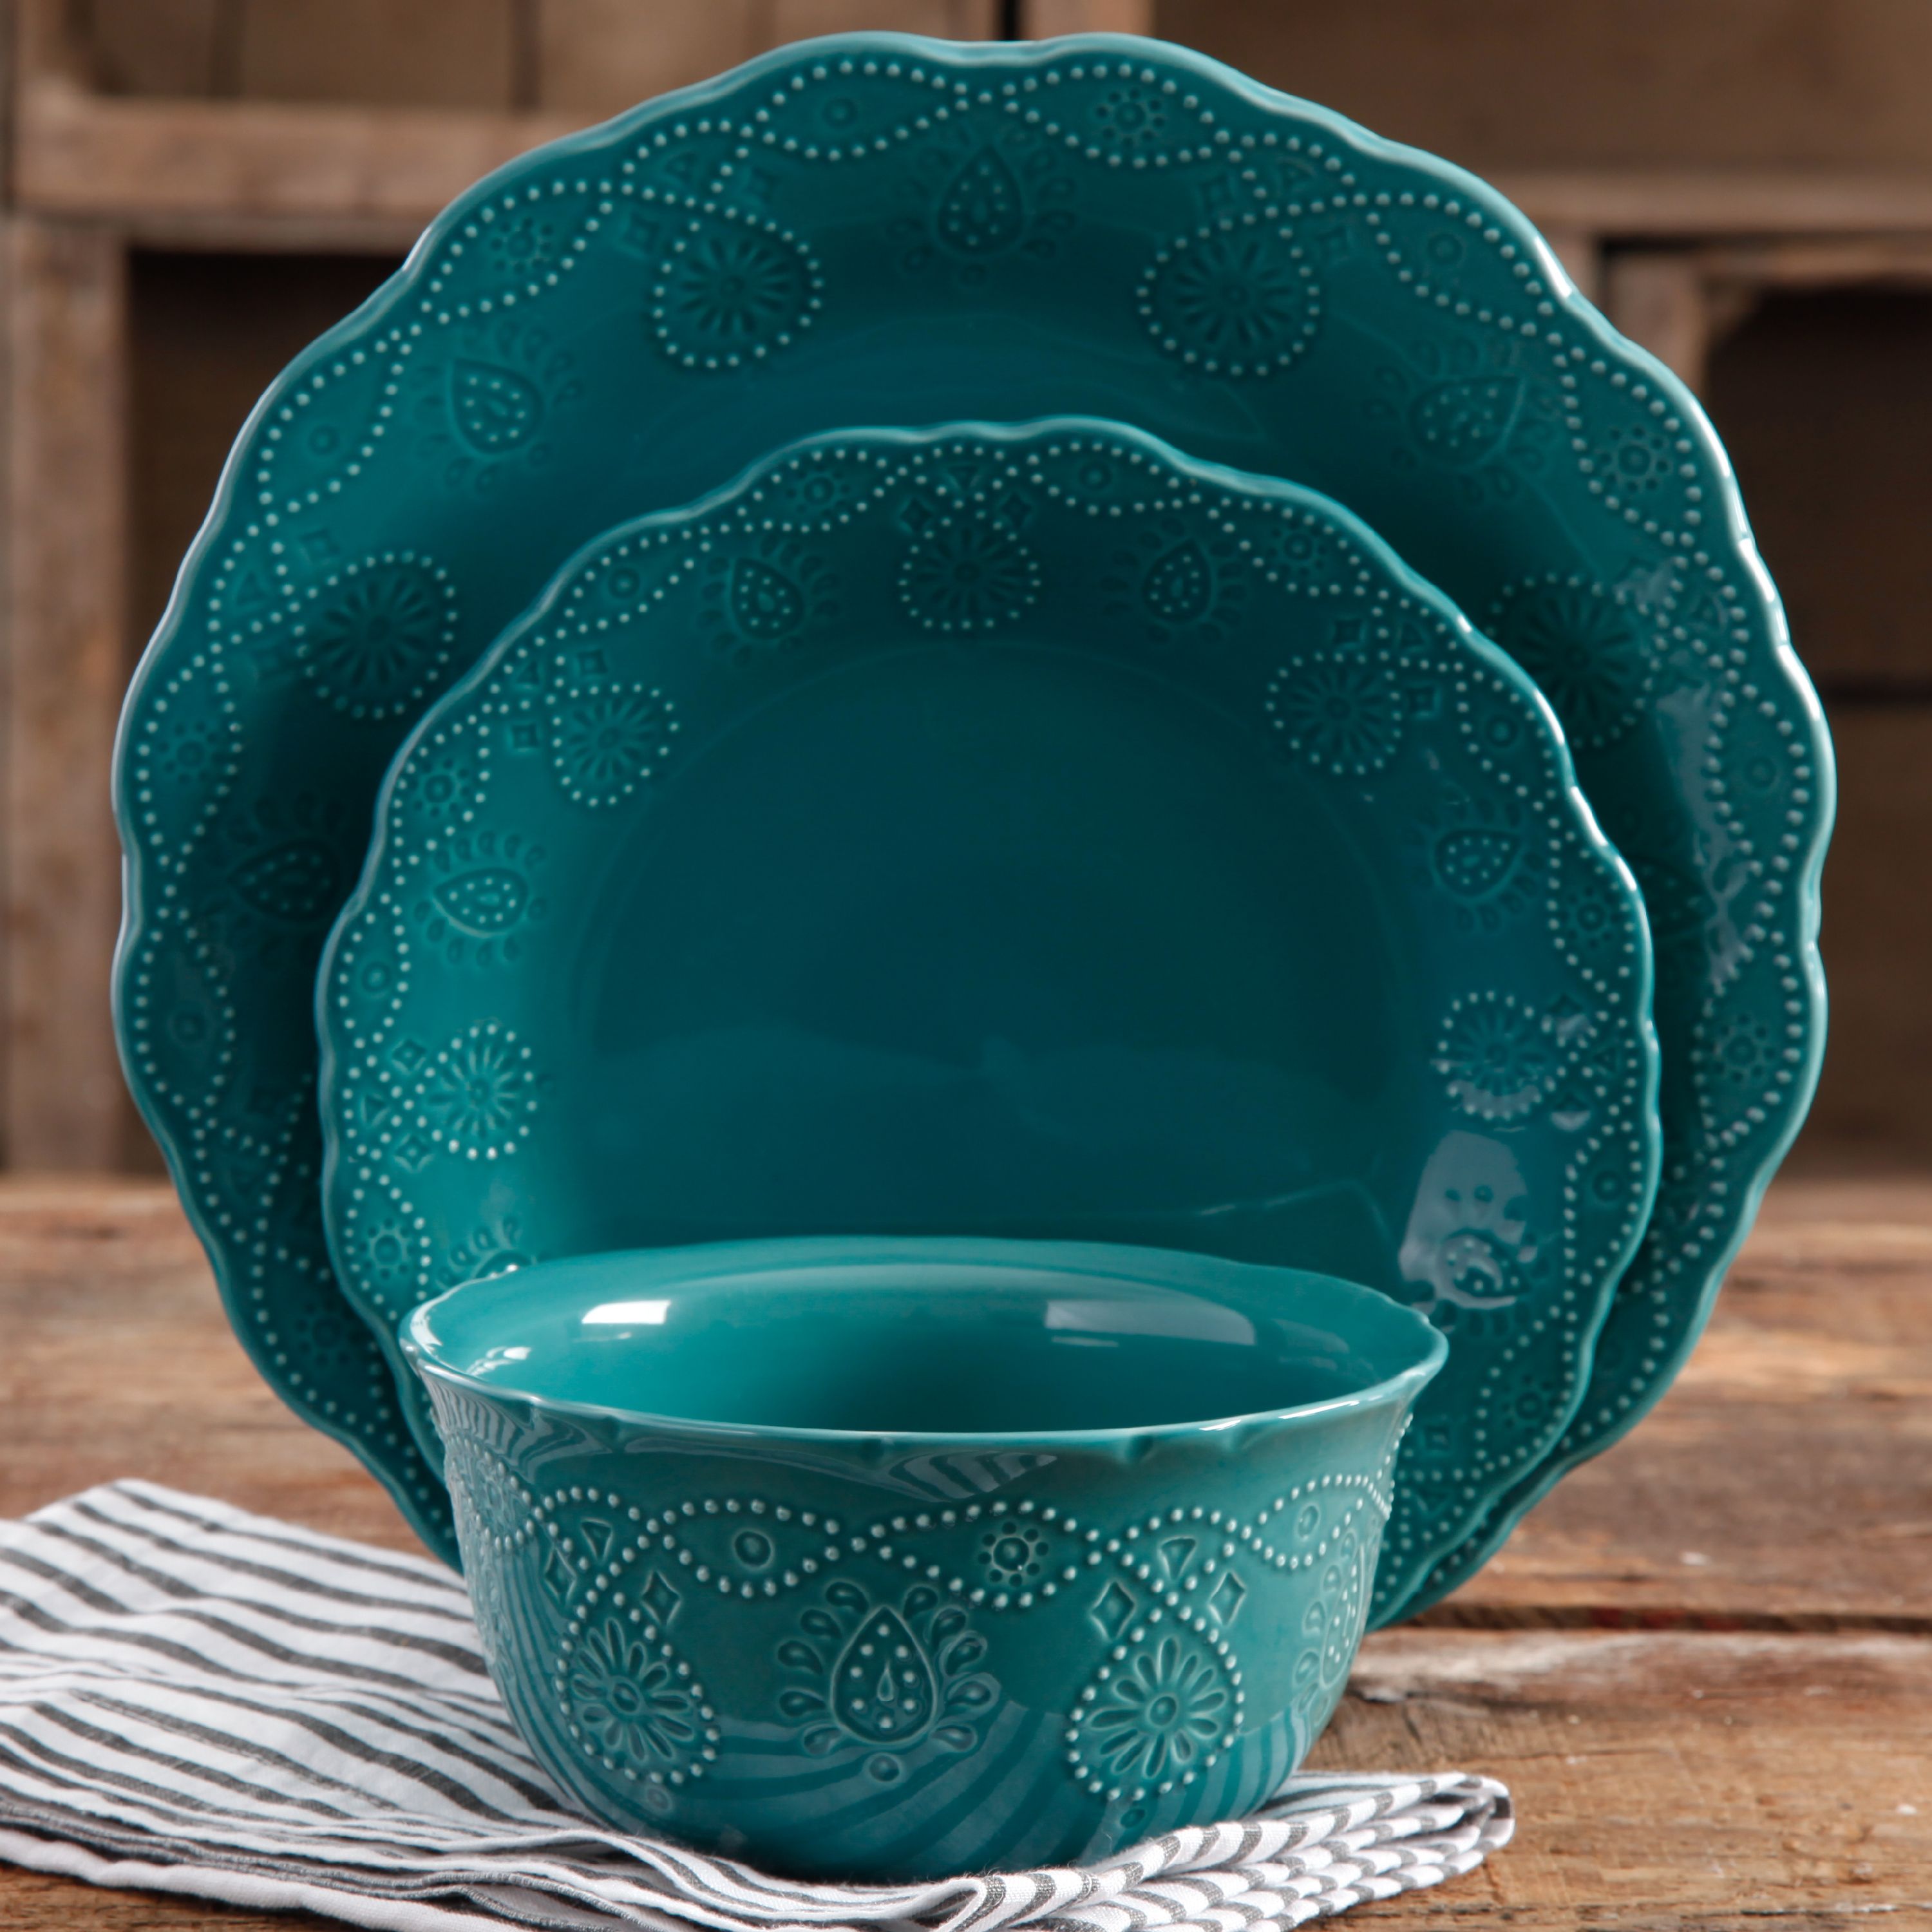 The Pioneer Woman Cowgirl Lace 12-Piece Dinnerware Set, Teal - image 2 of 7